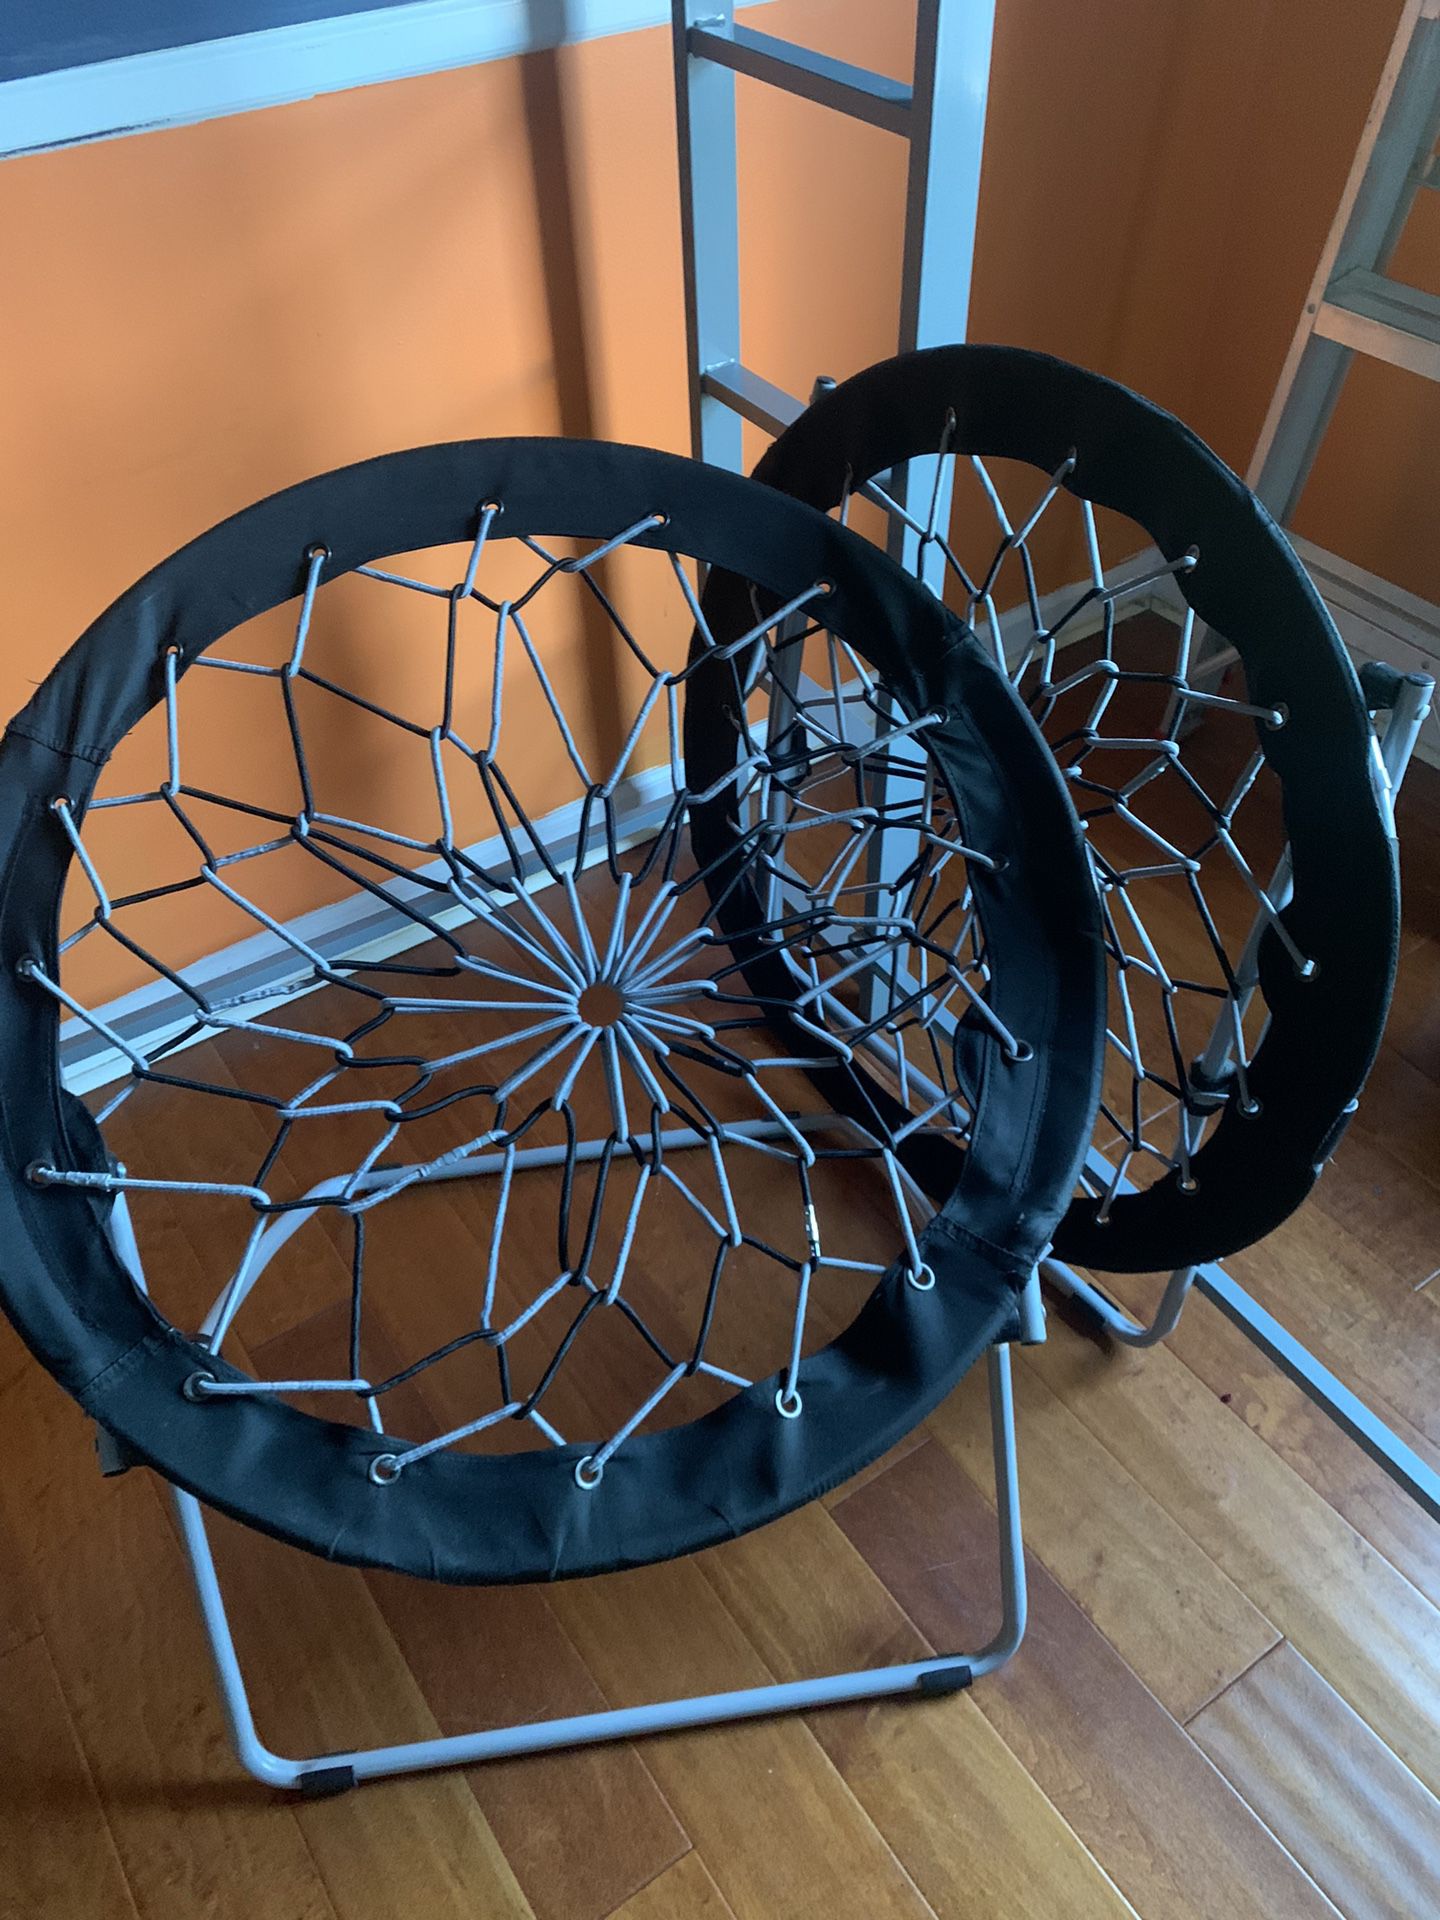 Spider Web Chairs